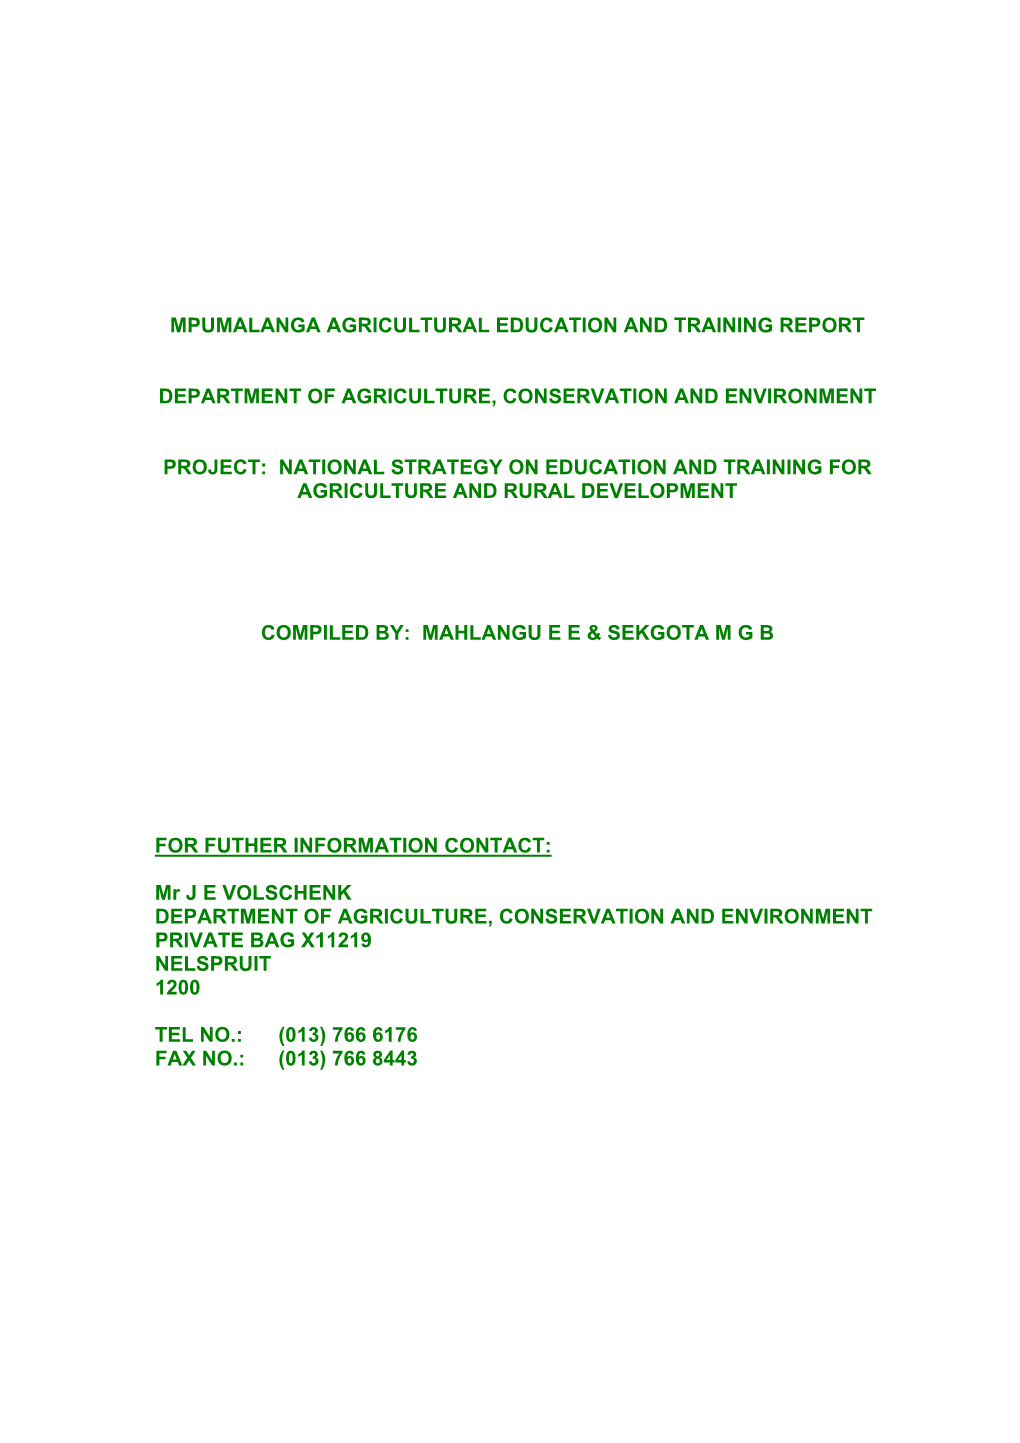 Mpumalanga Agricultural Education and Training Report